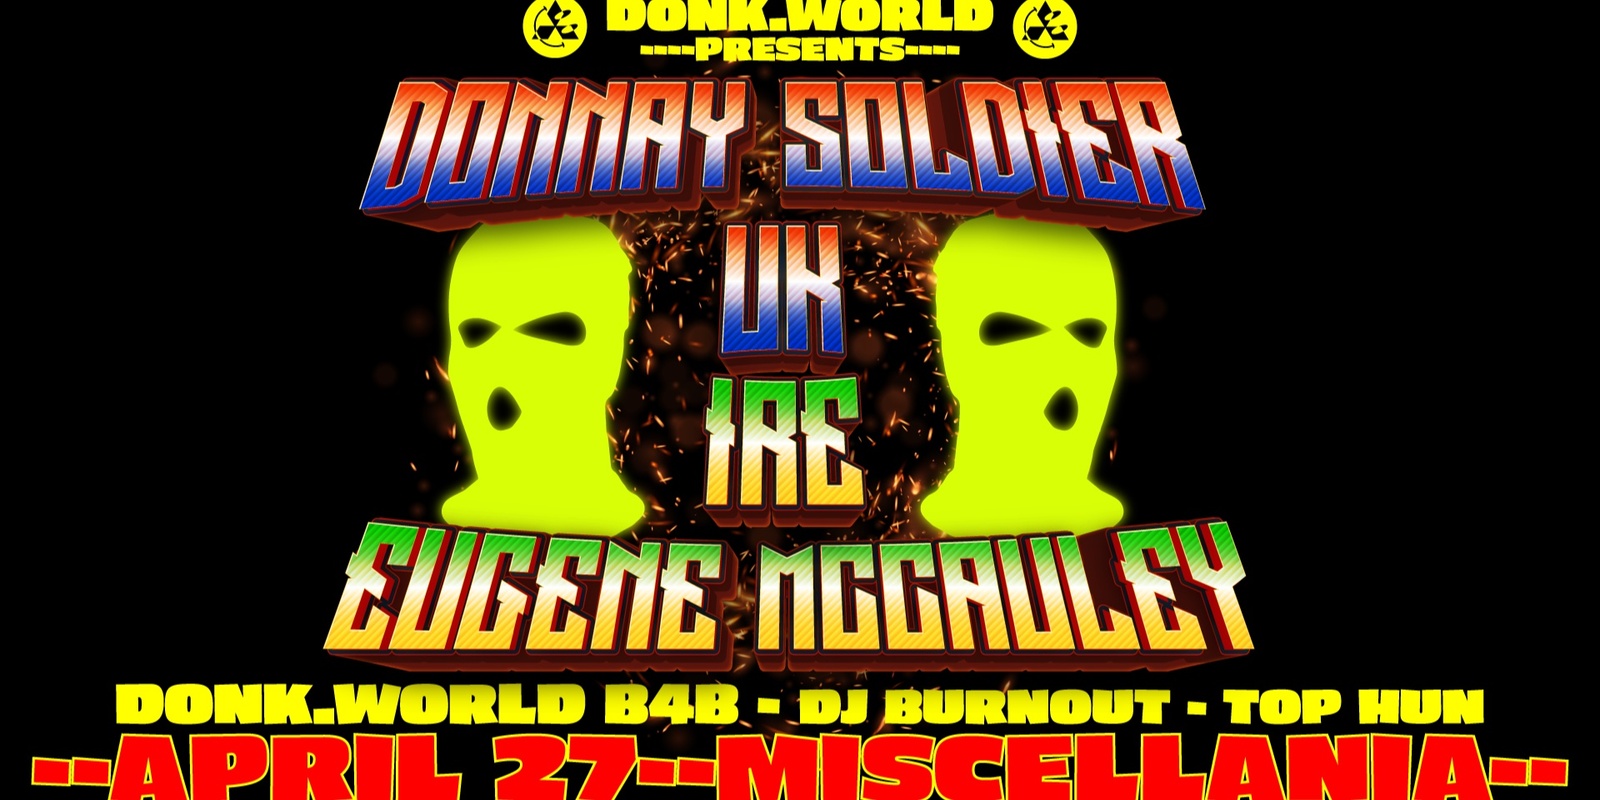 Banner image for ***TIX AVAILABLE ON DOOR*** DONK.WORLD PRESENT: DONNAY SOLDIER & EUGENE MCCAULEY